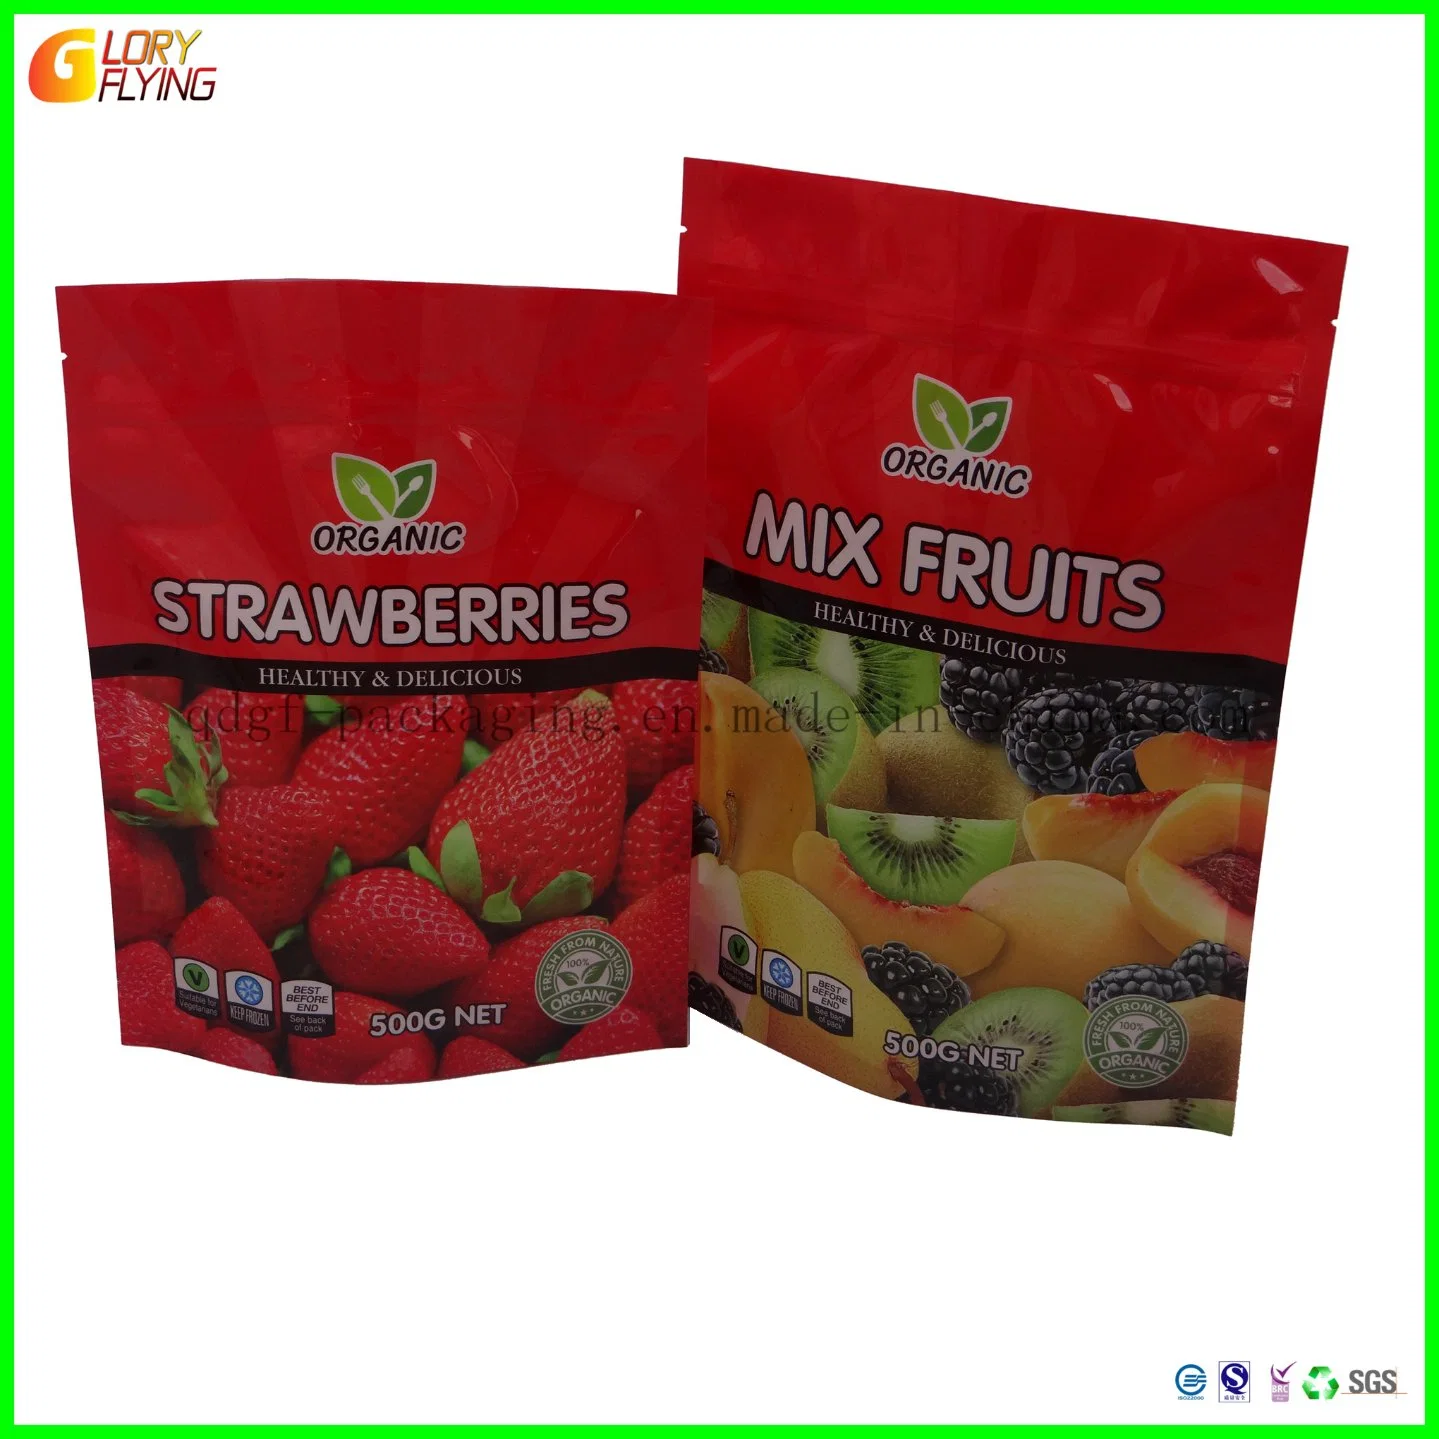 Production of Fruit Drink Plastic, Fruit Salad Plastic, Coffee Plastic, Frozen Food Packaging, Puffed Food Plastic Bags.